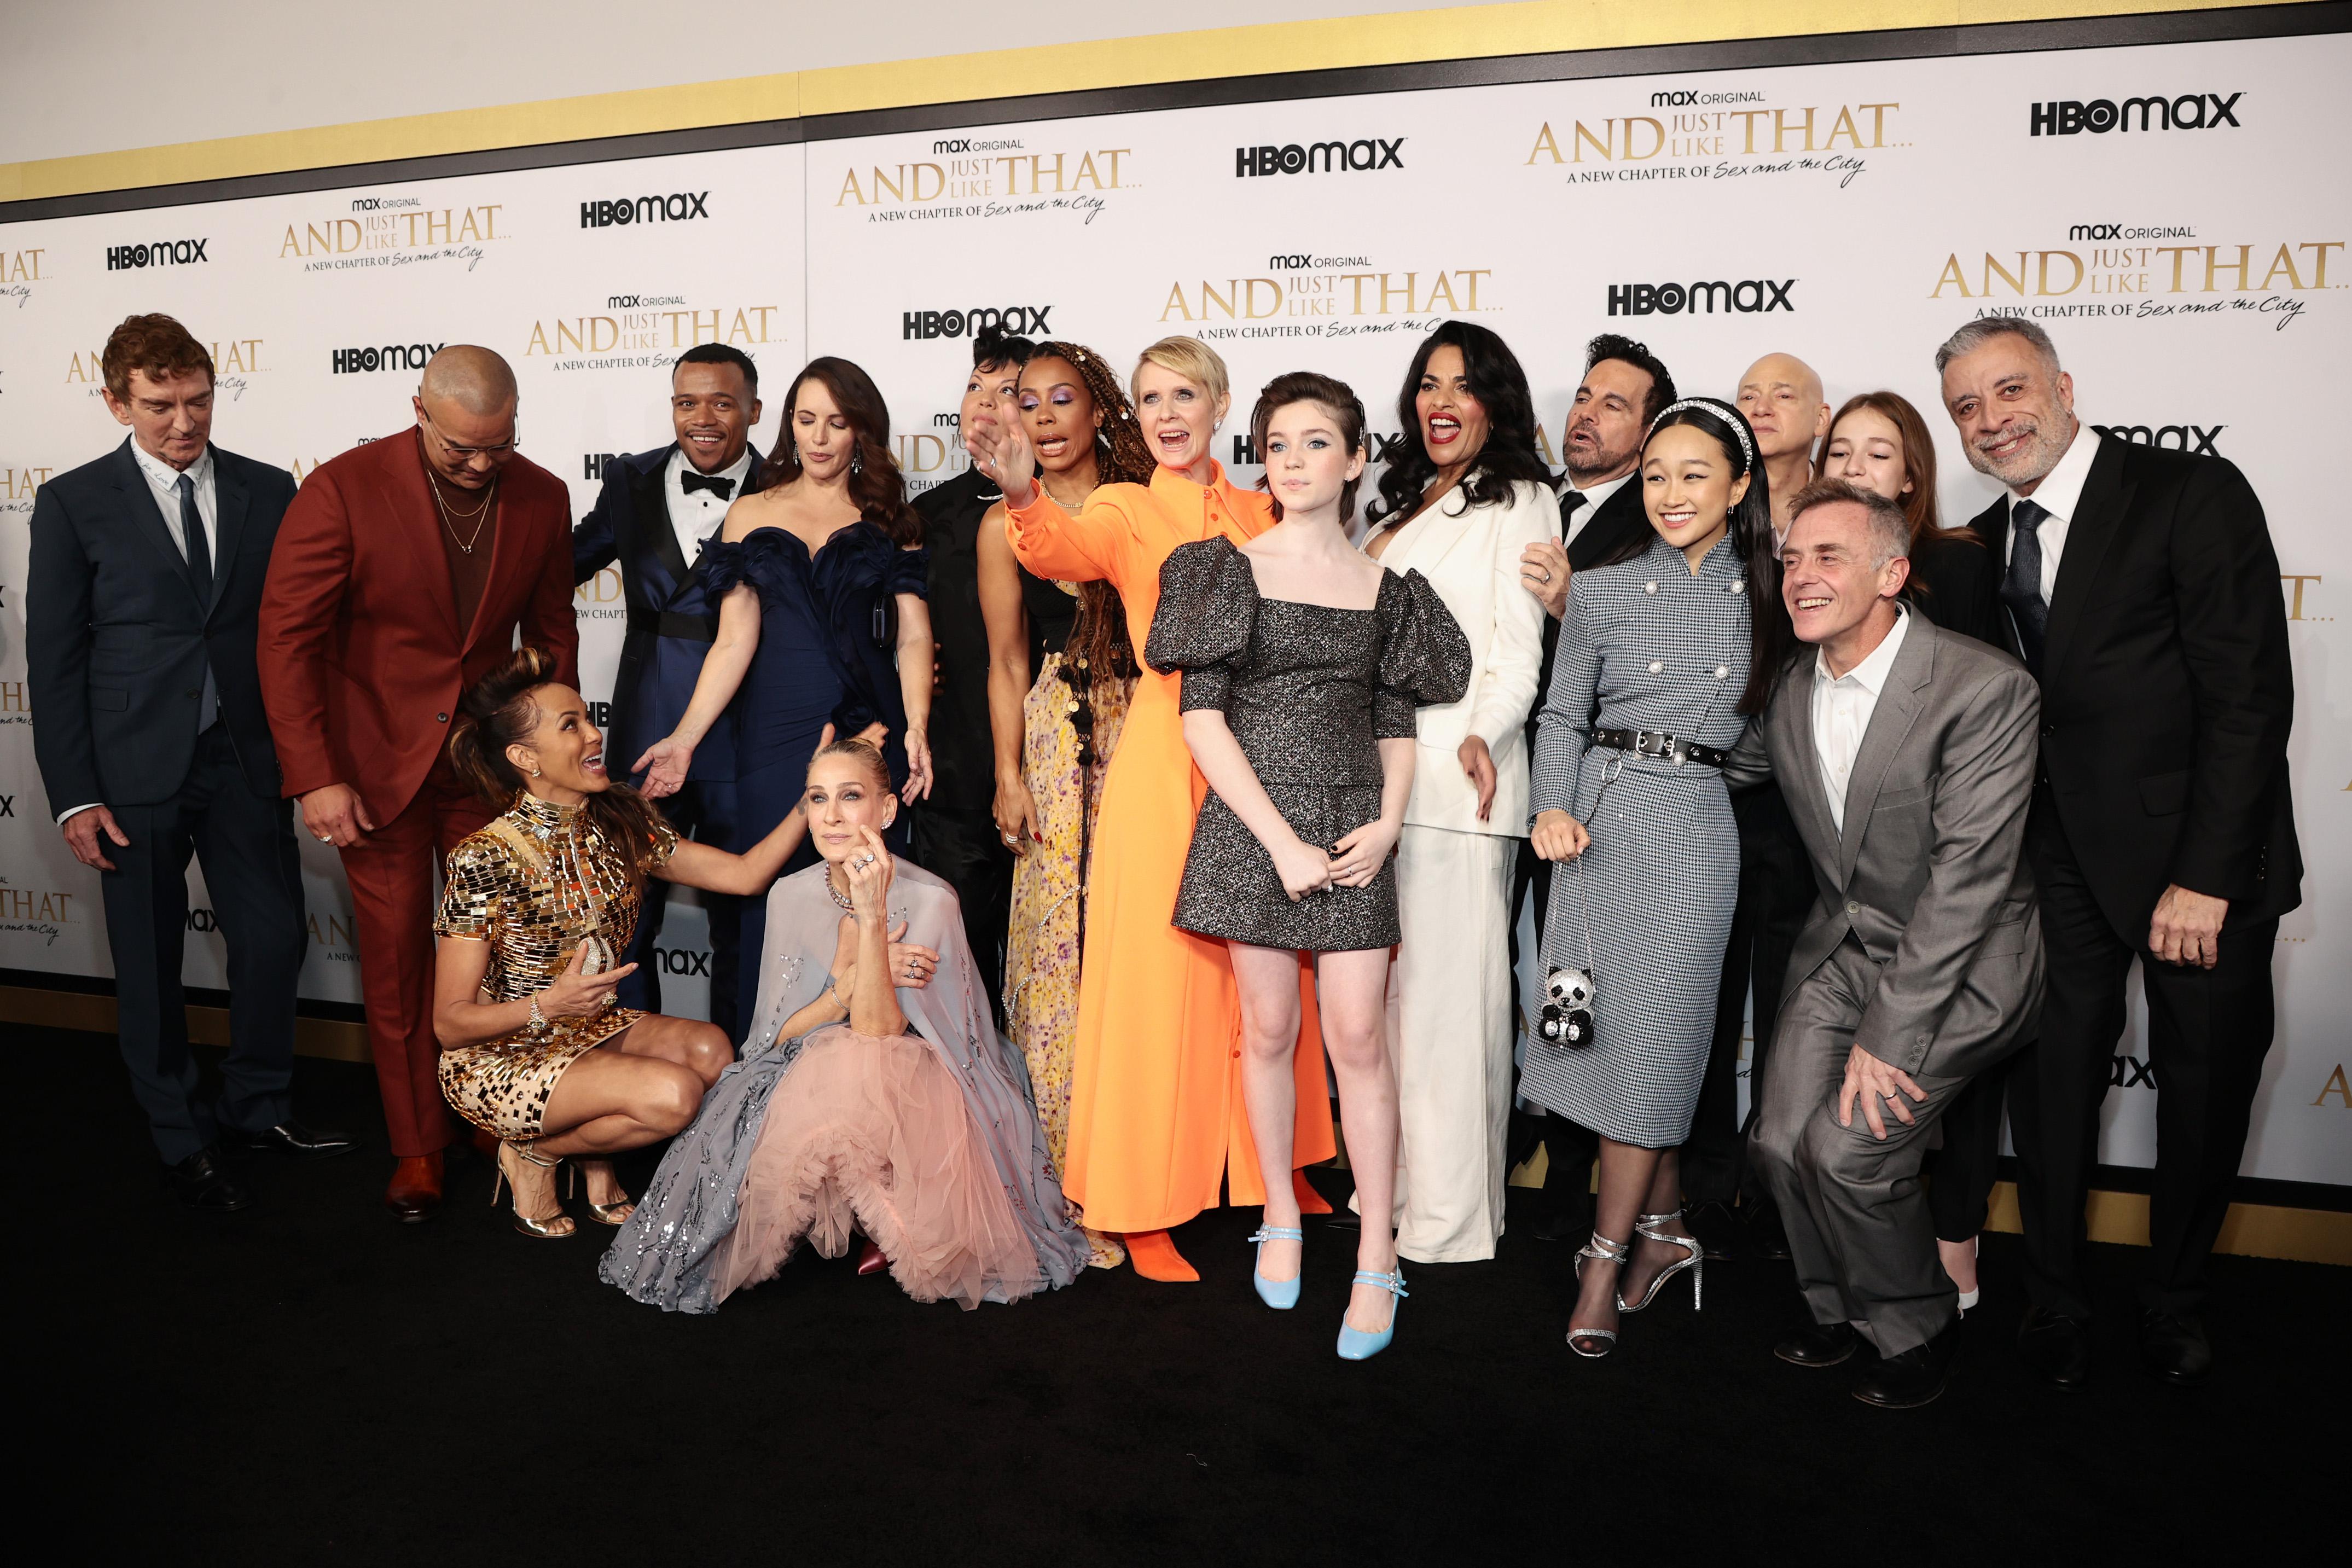 Sarah Jessica Parker poses with the cast and crew at HBO Max's premiere of "And Just Like That" at Museum of Modern Art on December 08, 2021 in New York City. 